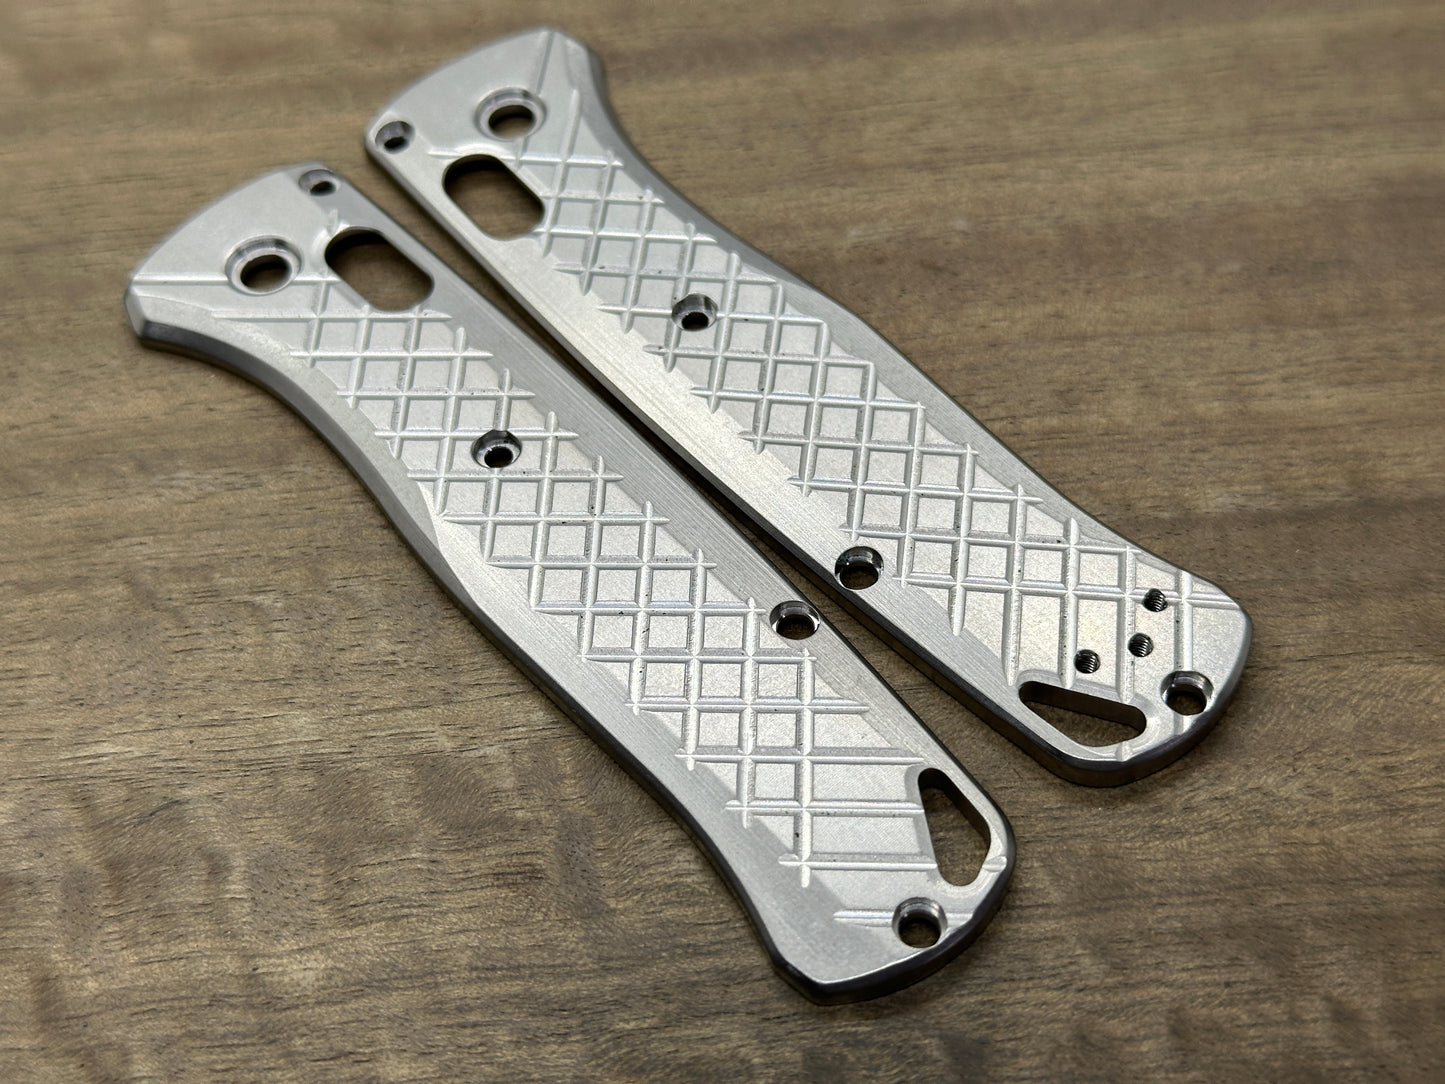 Tumbled FRAG Cnc milled Titanium Scales for Benchmade Bugout 535